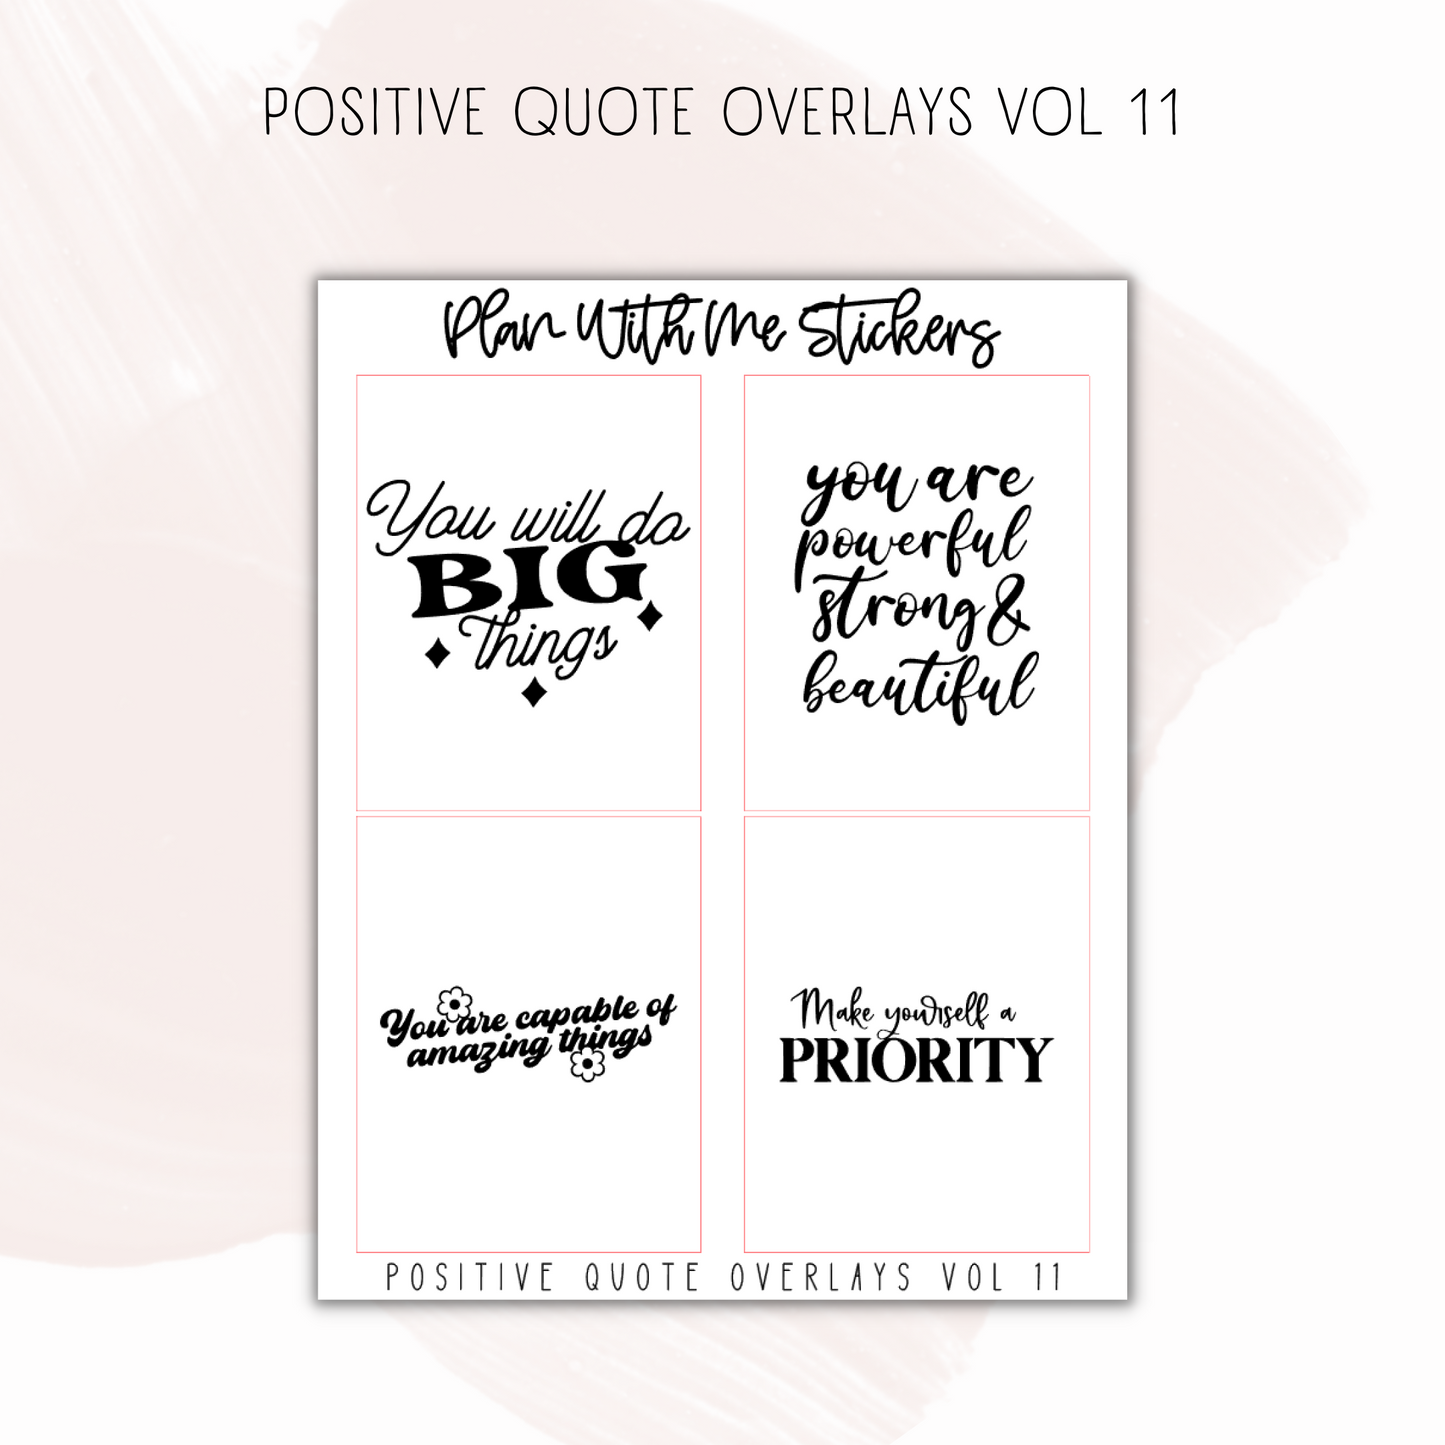 Positive Quote Overlays Vol 10